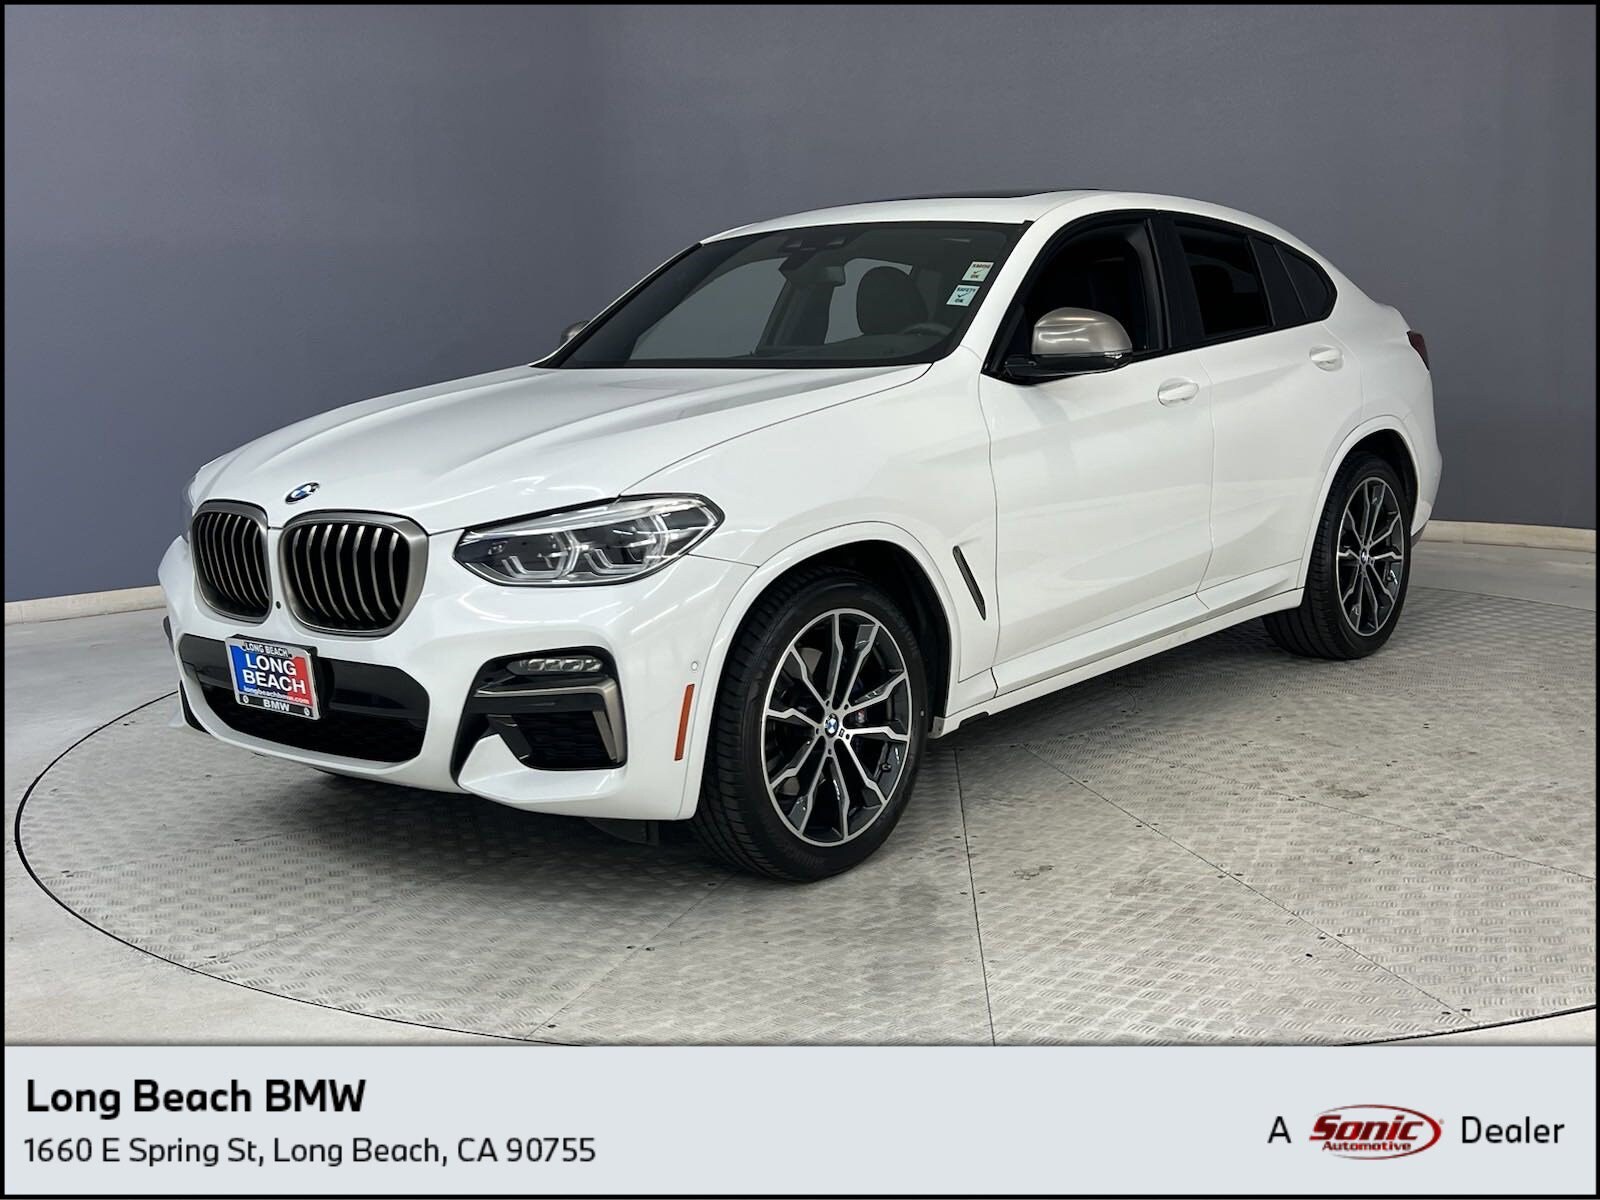 | X4 for 2020 3 | Bumper Page Sale BMW